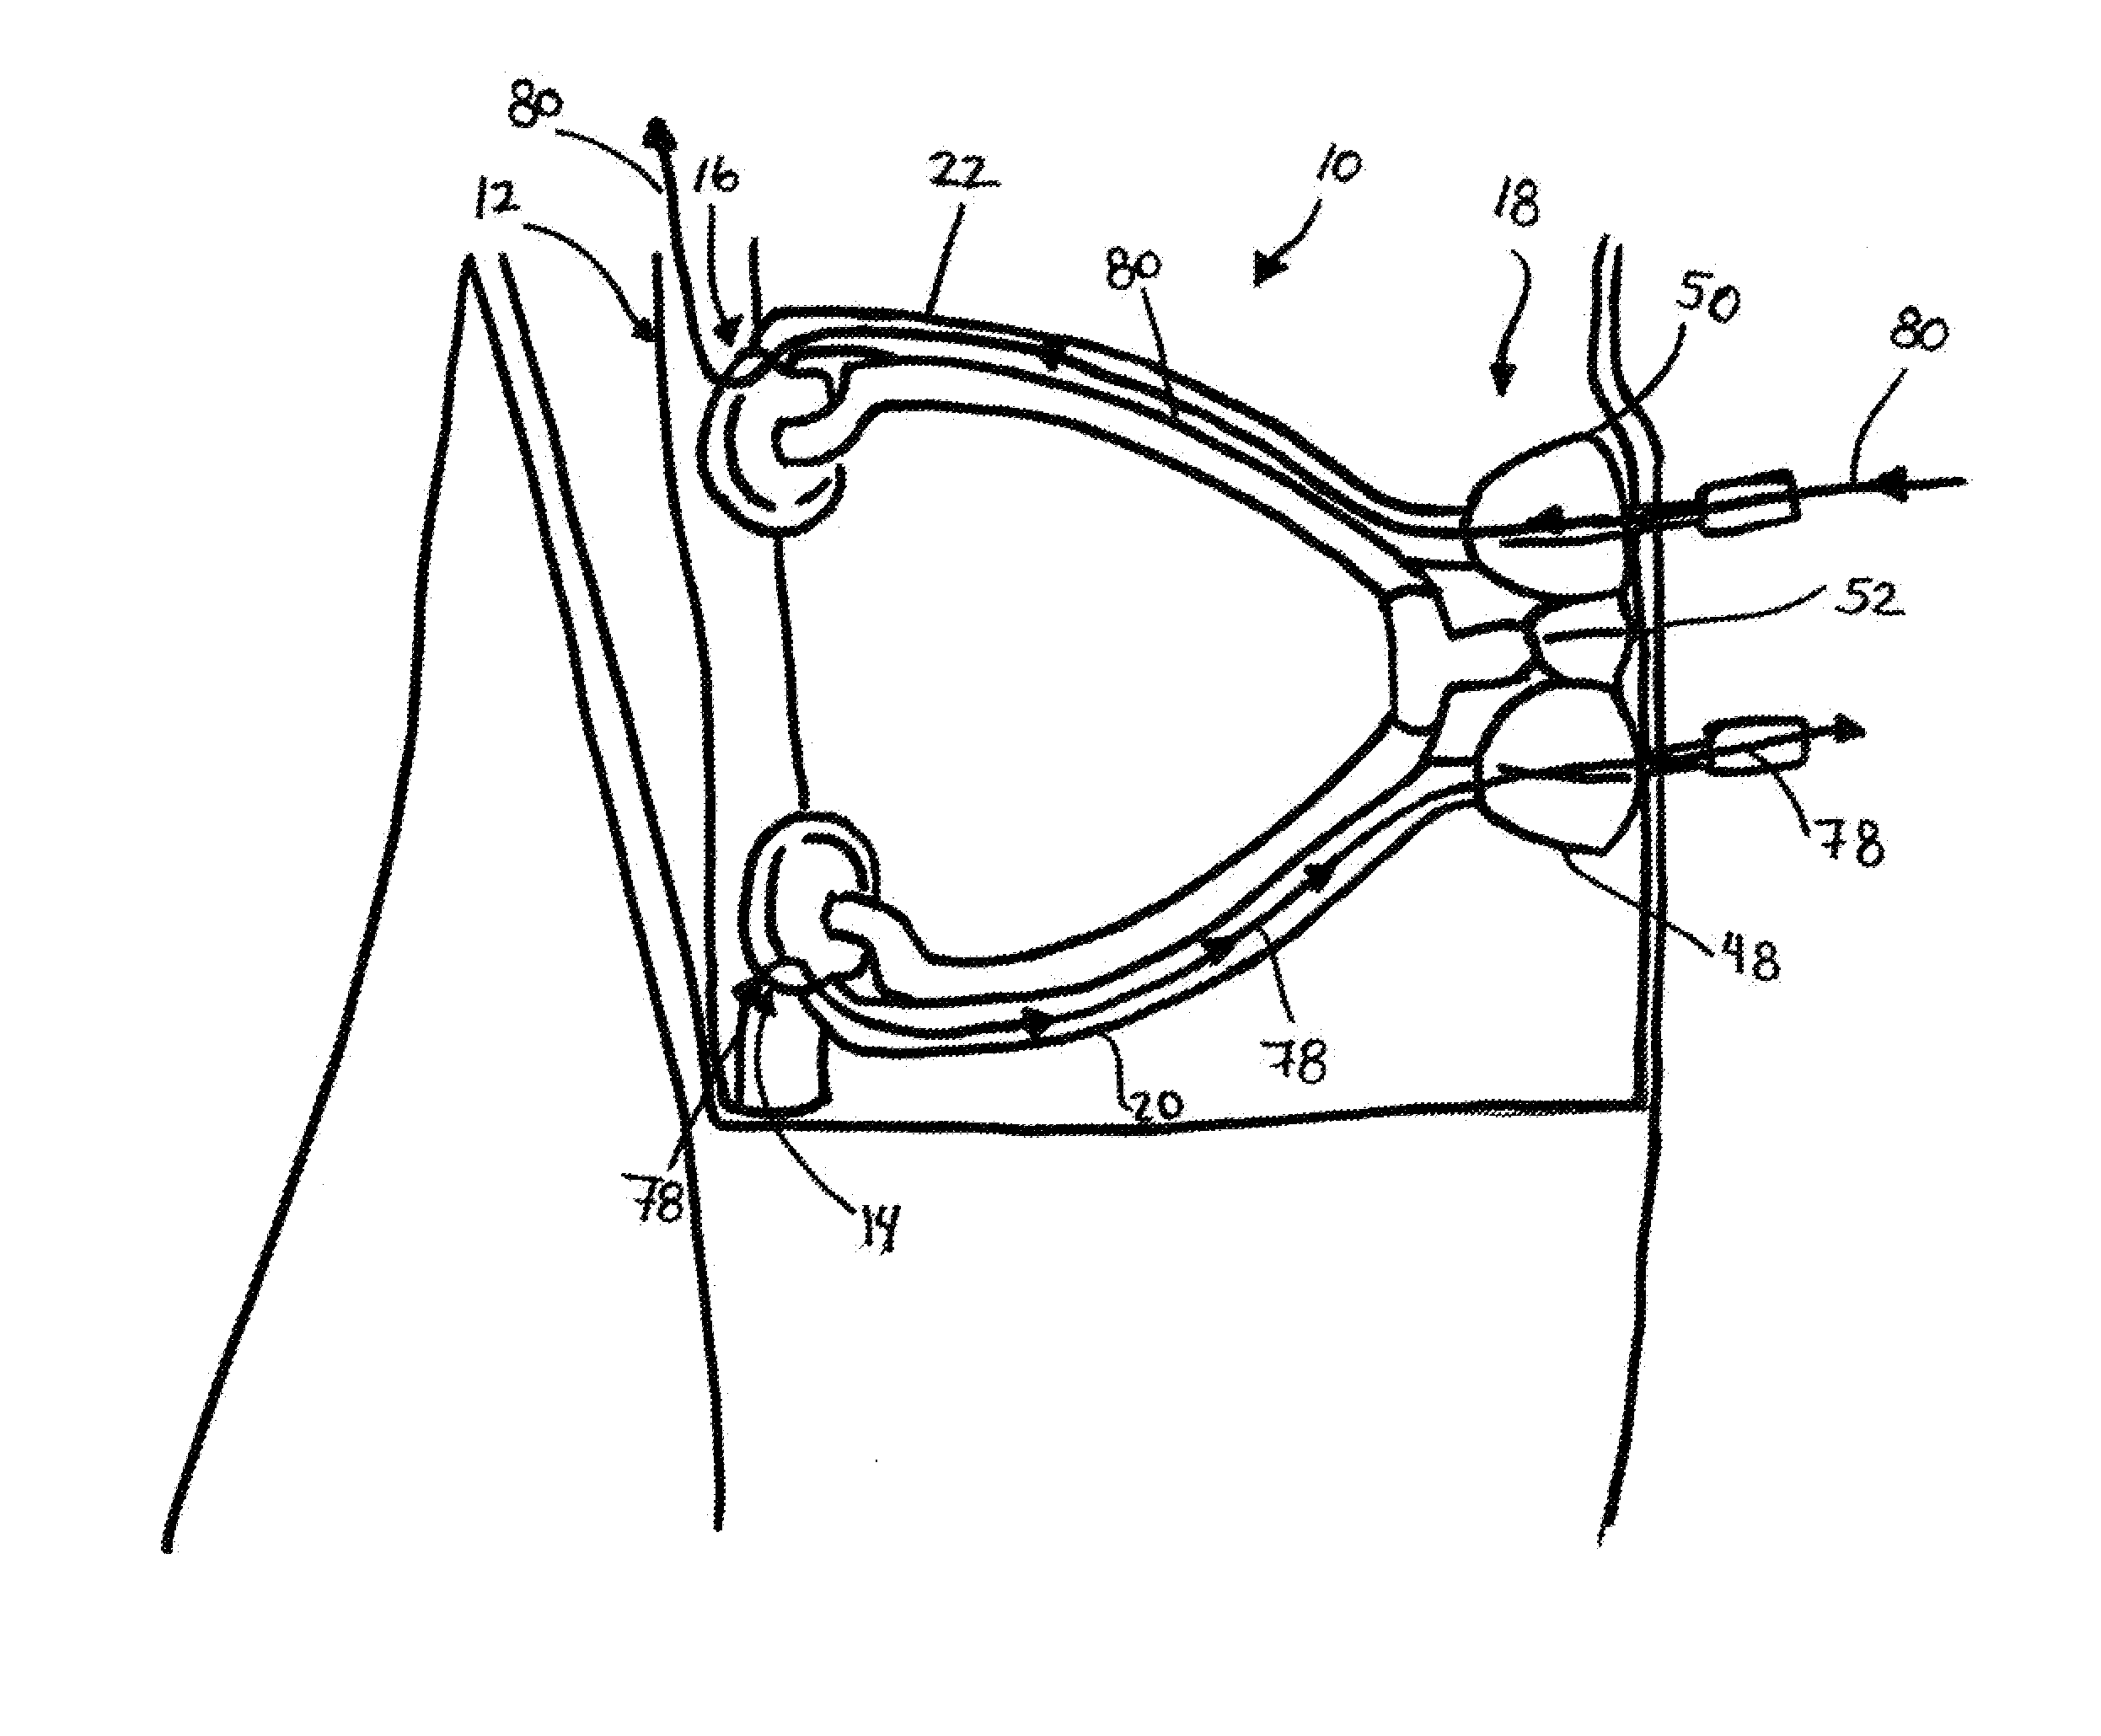 Hemodialysis access port and cleaning system